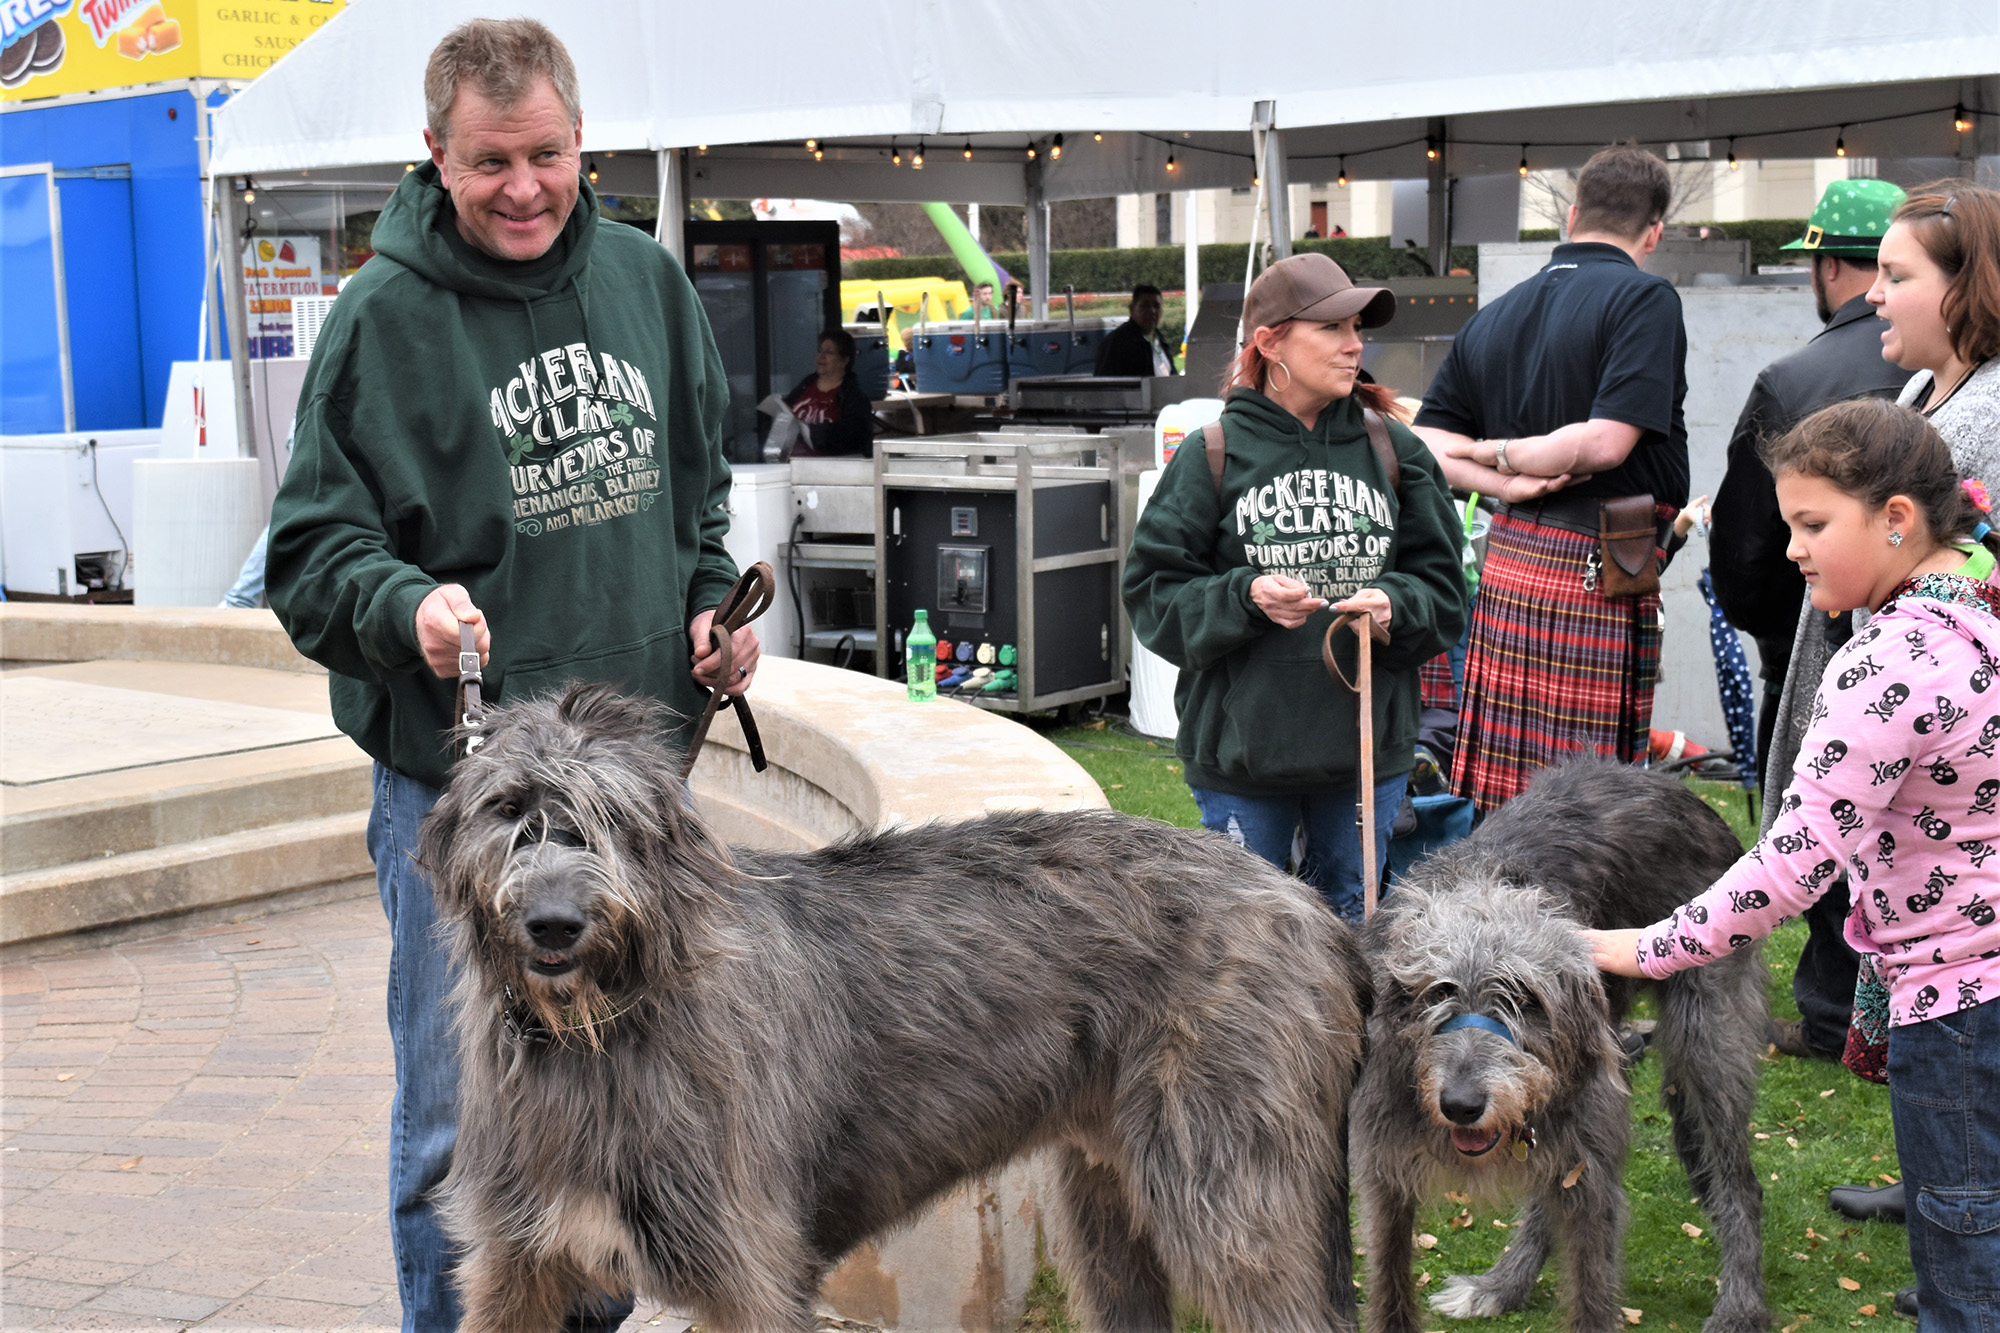 Two Irish Wolfhounds and their owners attending the festival